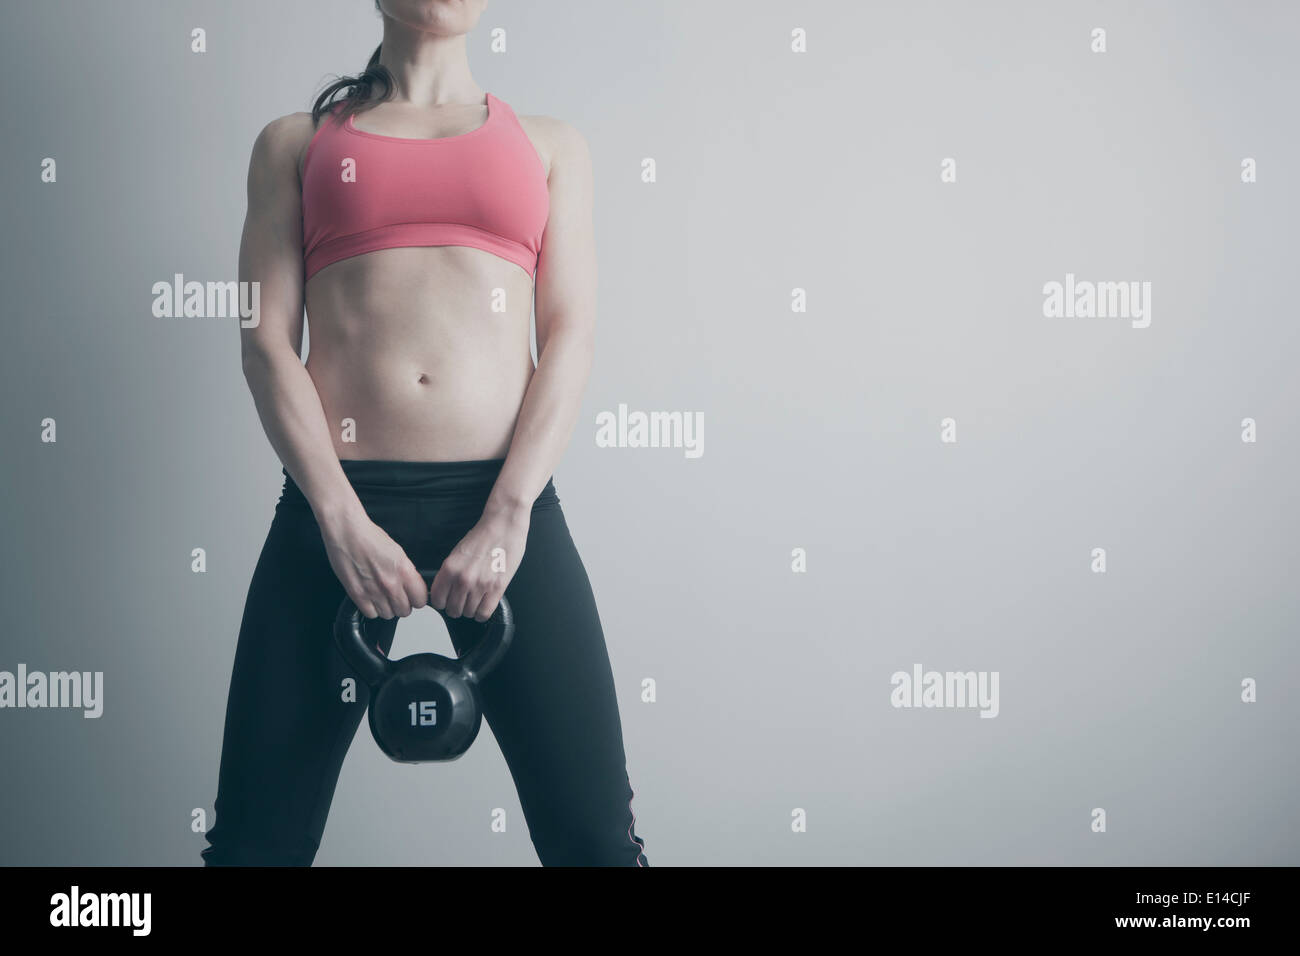 Caucasian woman holding kettle bell Stock Photo